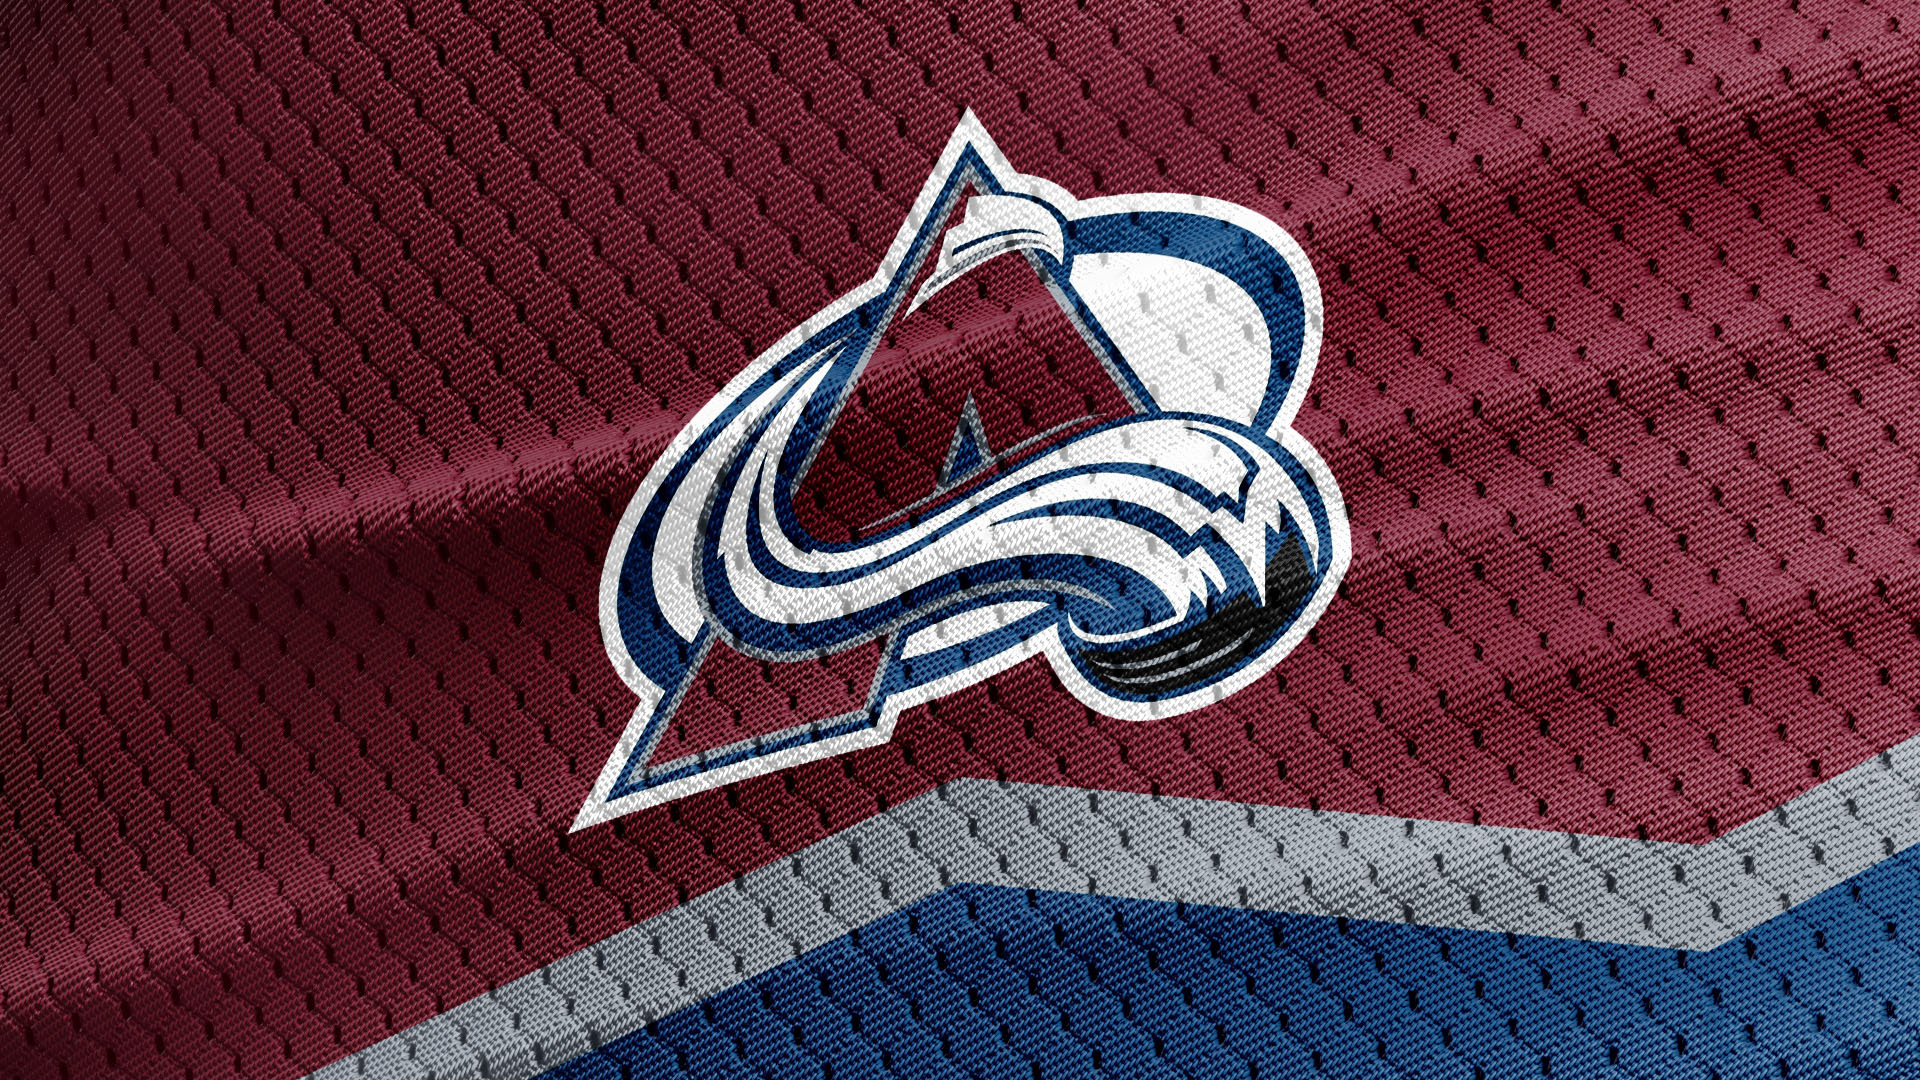 I made NHL team wallpapers using the new Adidas jerseys as